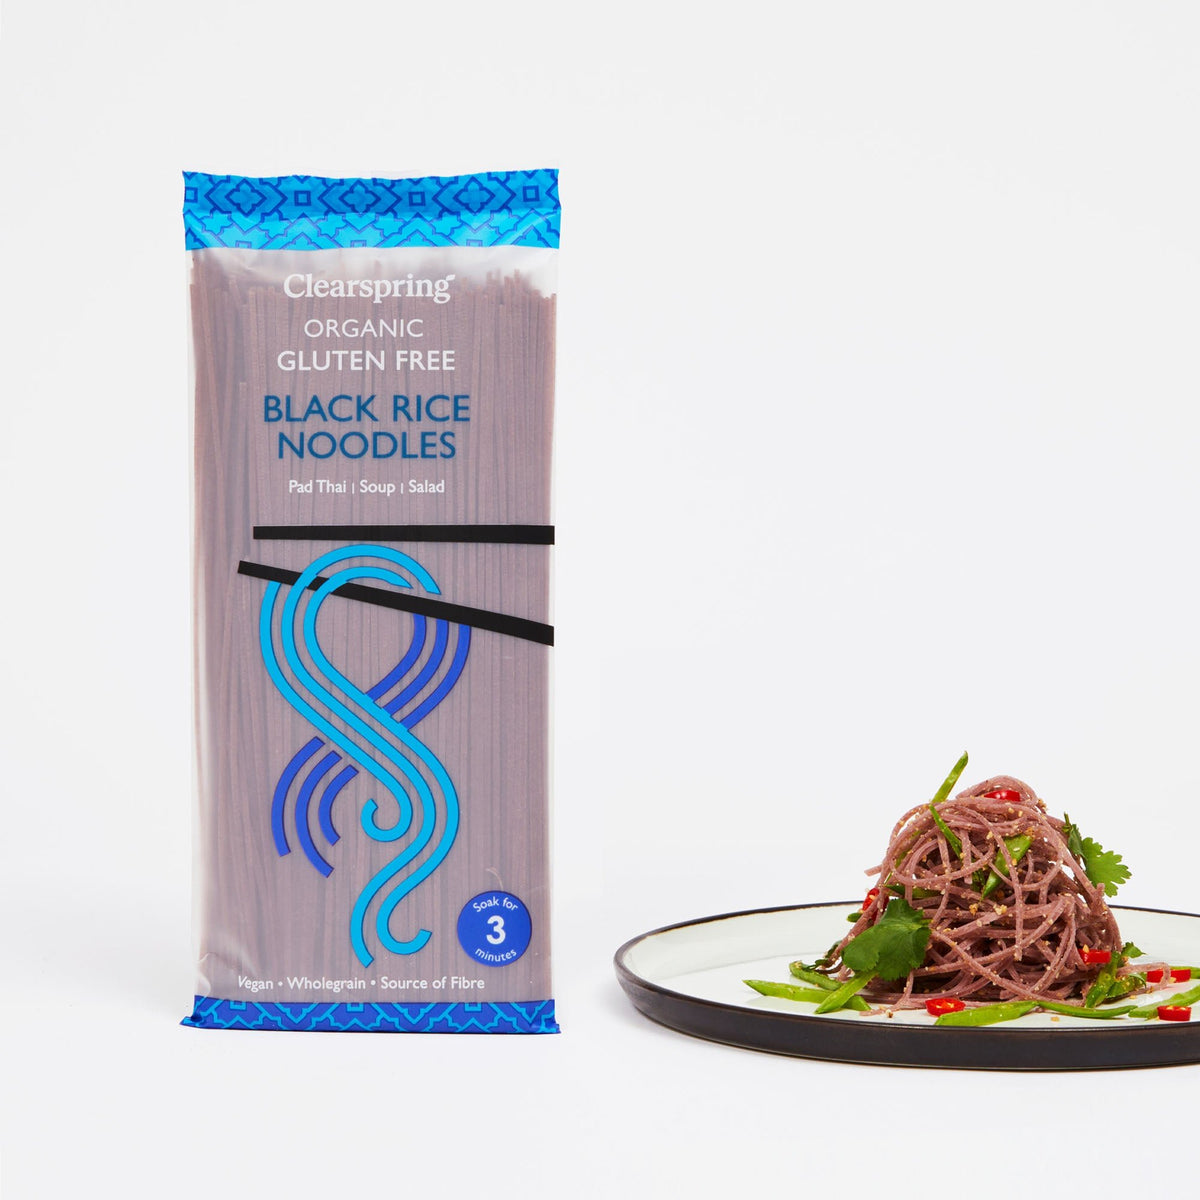 Clearspring Organic Gluten Free Black Rice Noodles